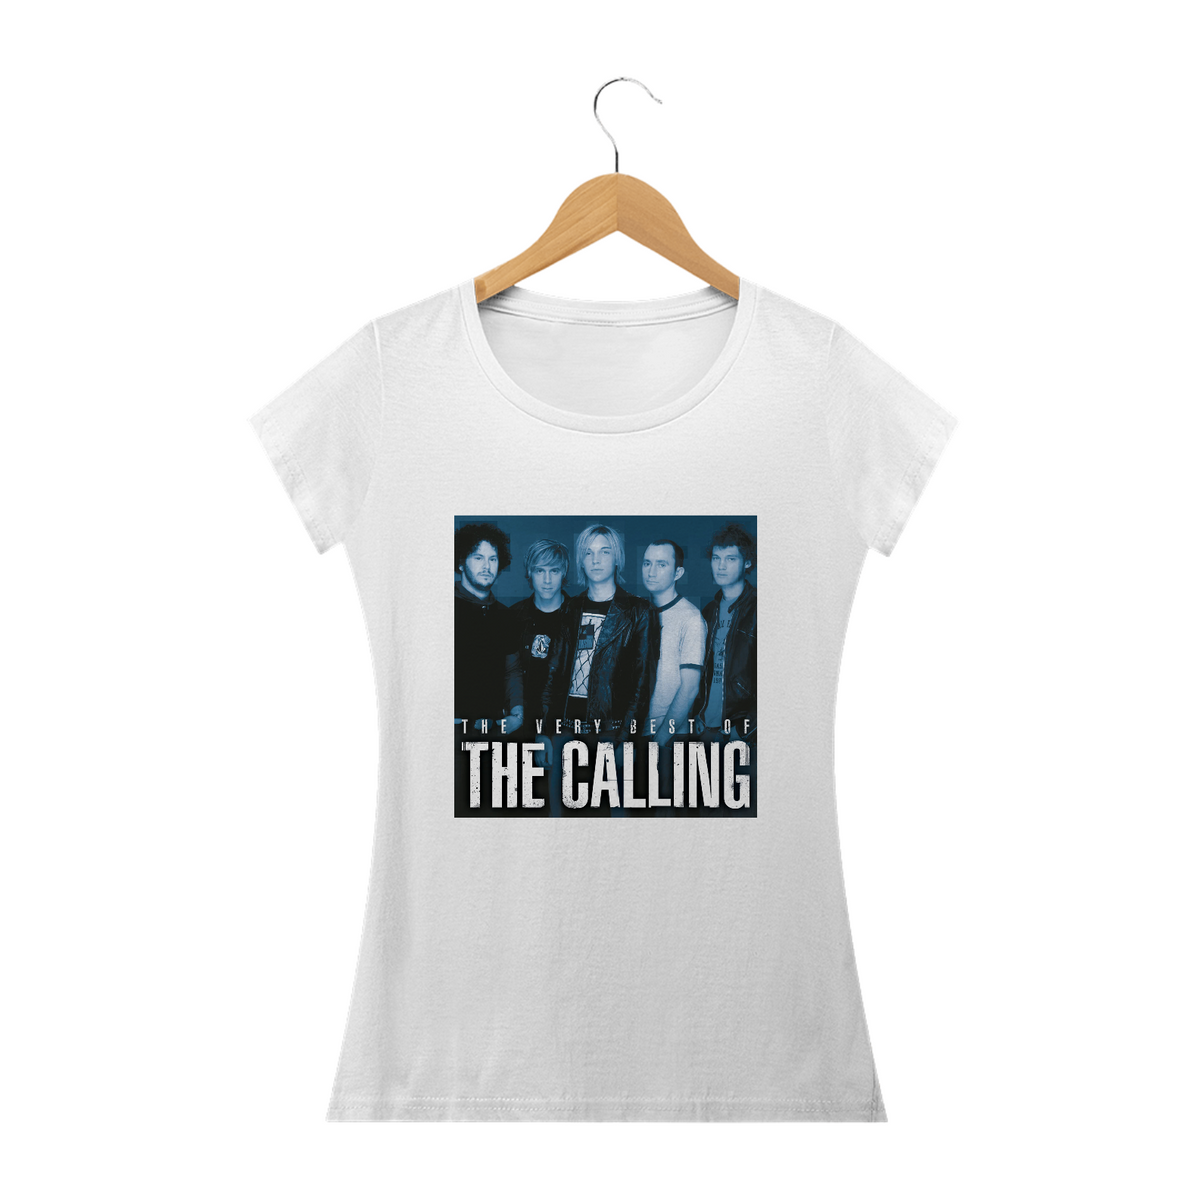 Nome do produto: Camisa The Calling - The Very Best - Baby Long